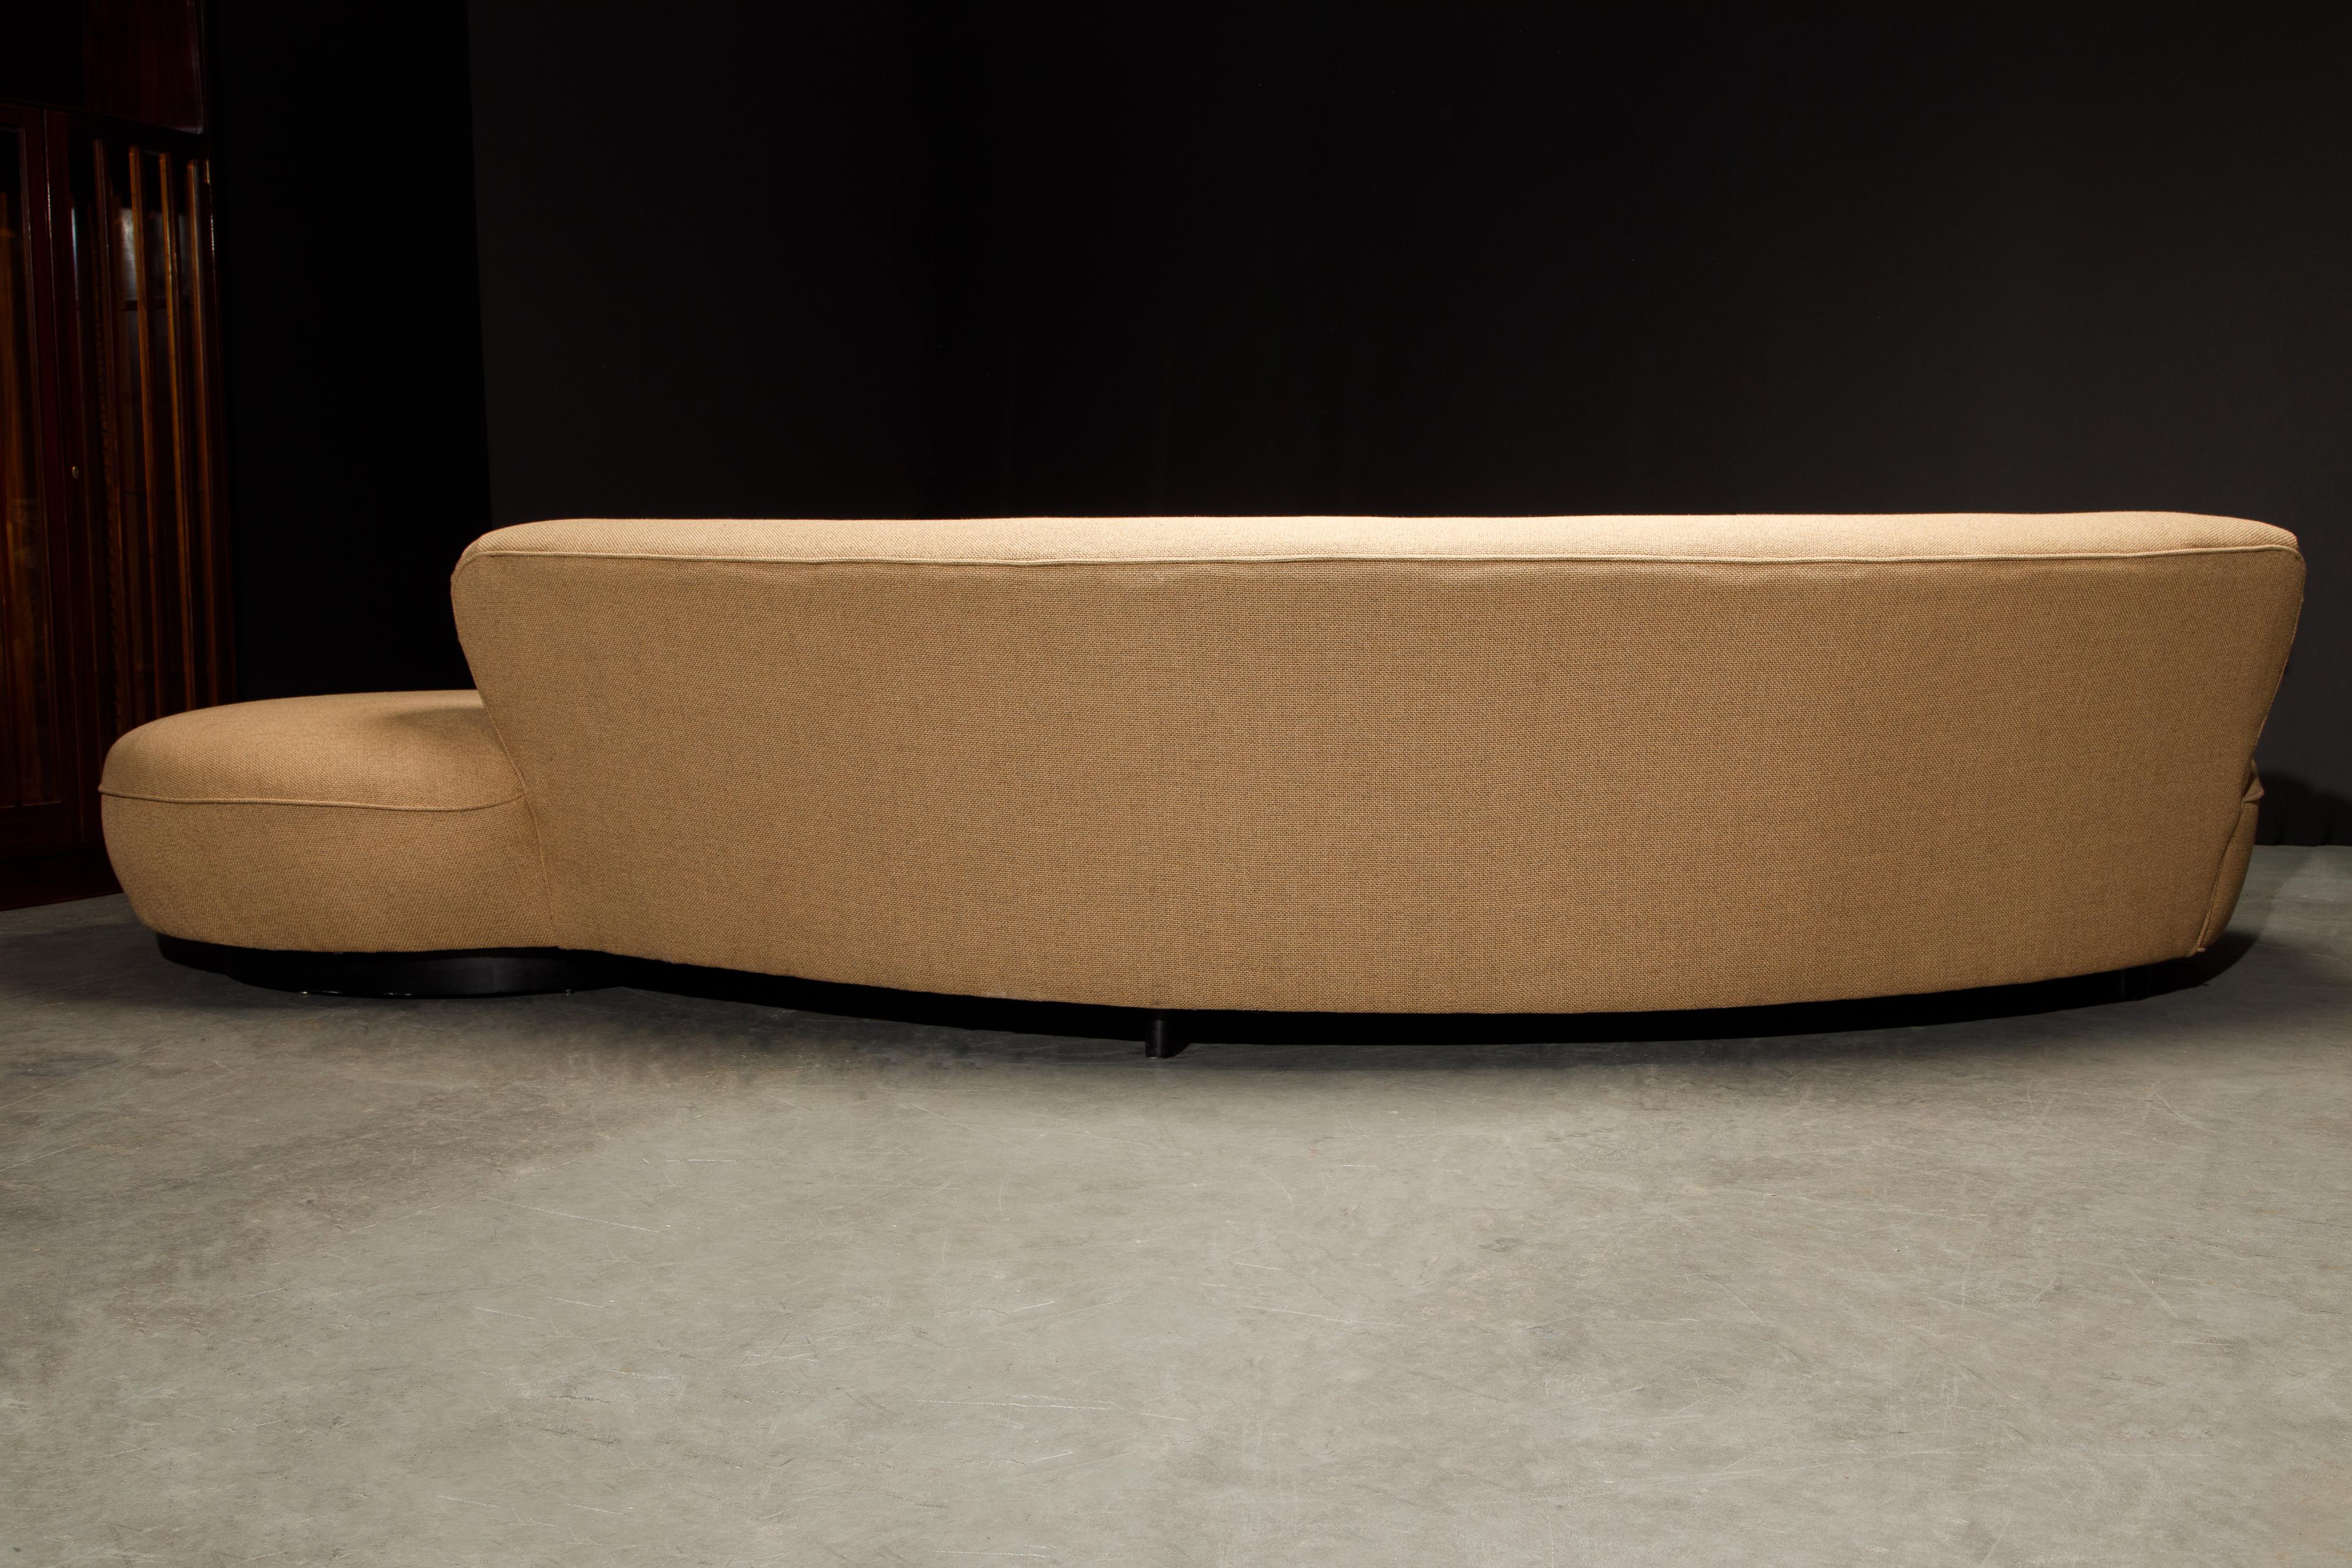 Fabric Early 'Serpentine' Sofa by Vladimir Kagan, circa 1960, Signed and Registered 